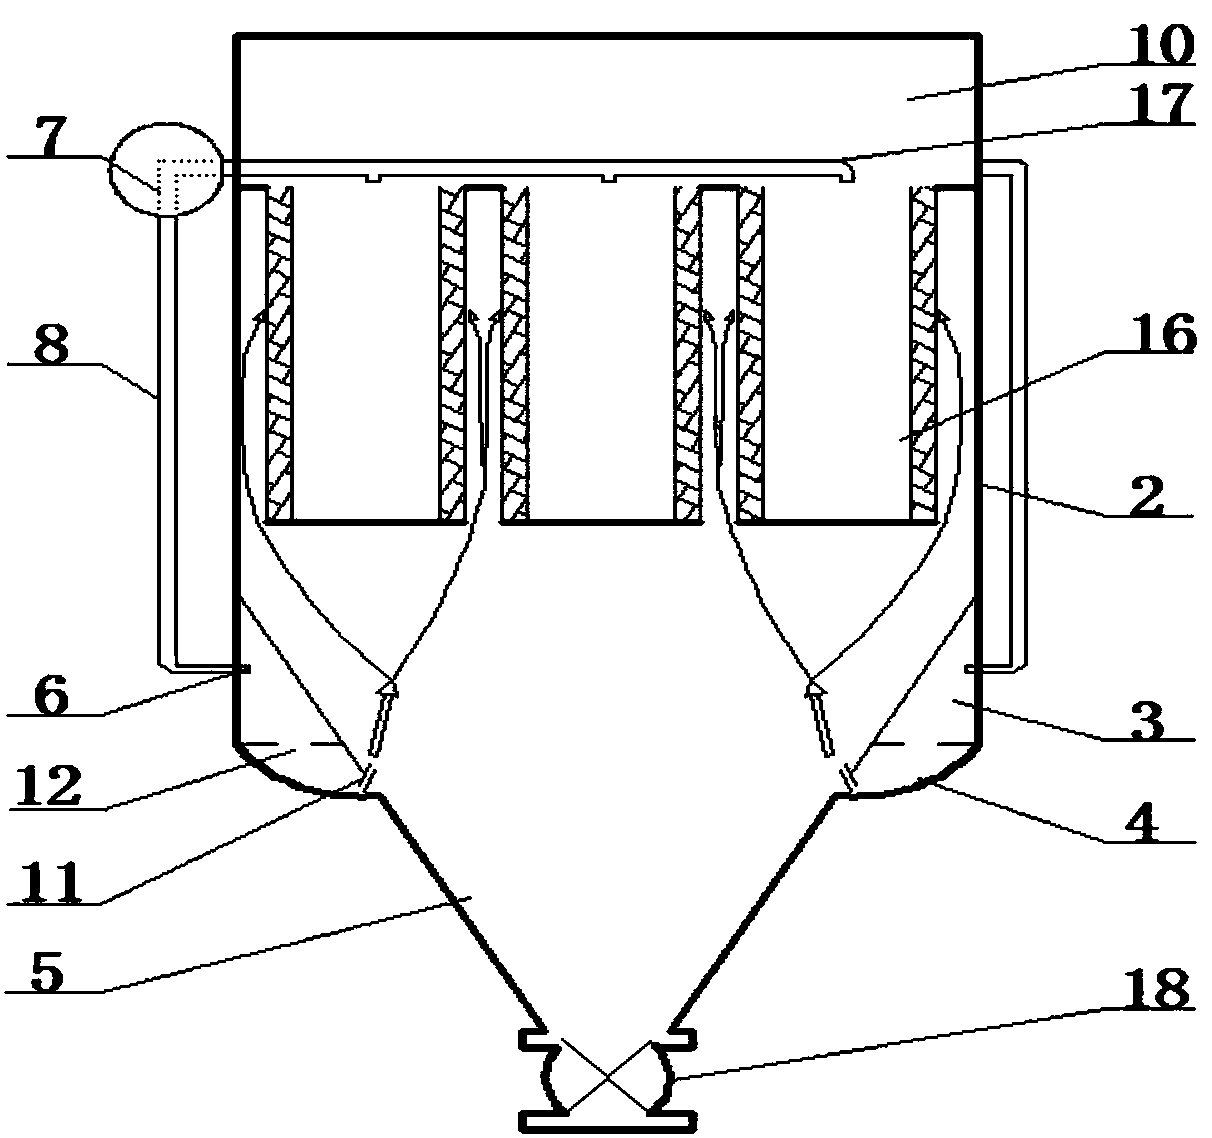 A filter cartridge dust collector with uniform air supply